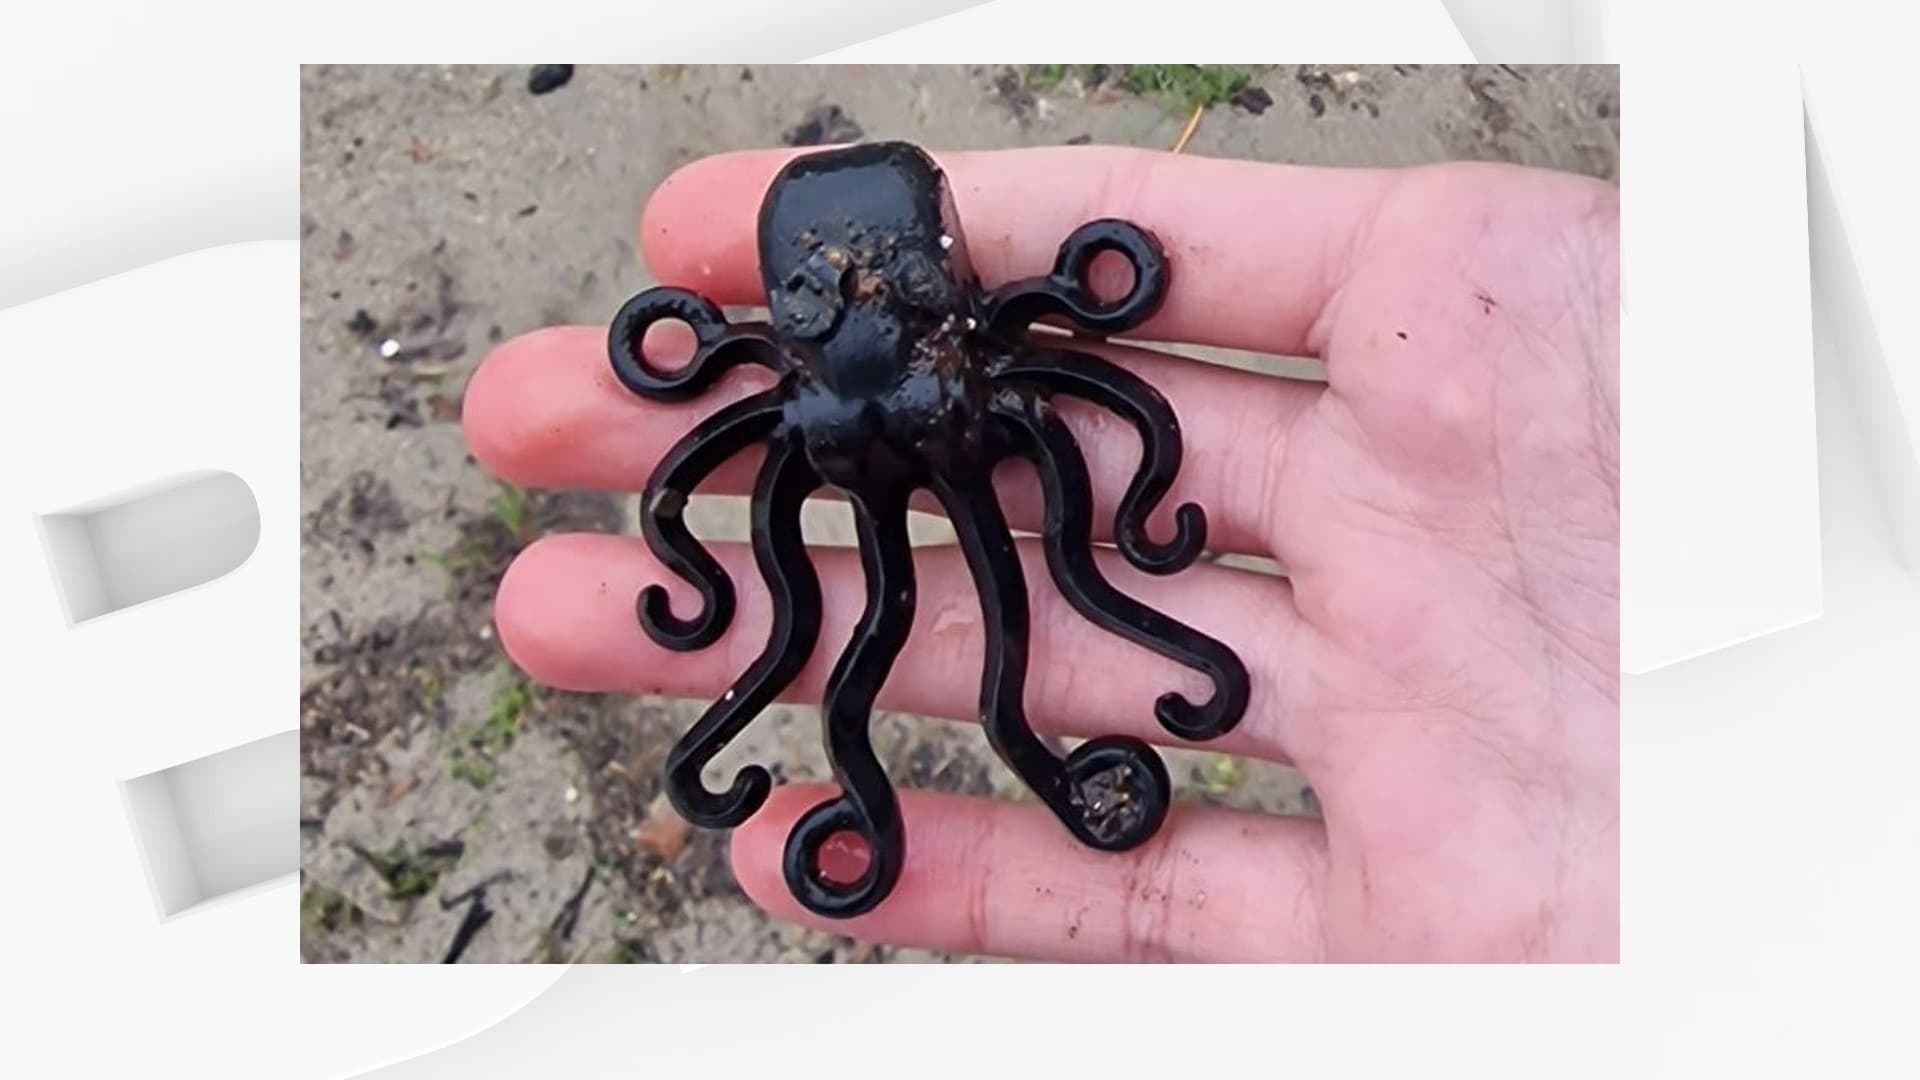 A British teenager has found some of the rarest LEGO pieces that fell off a boat in 1997